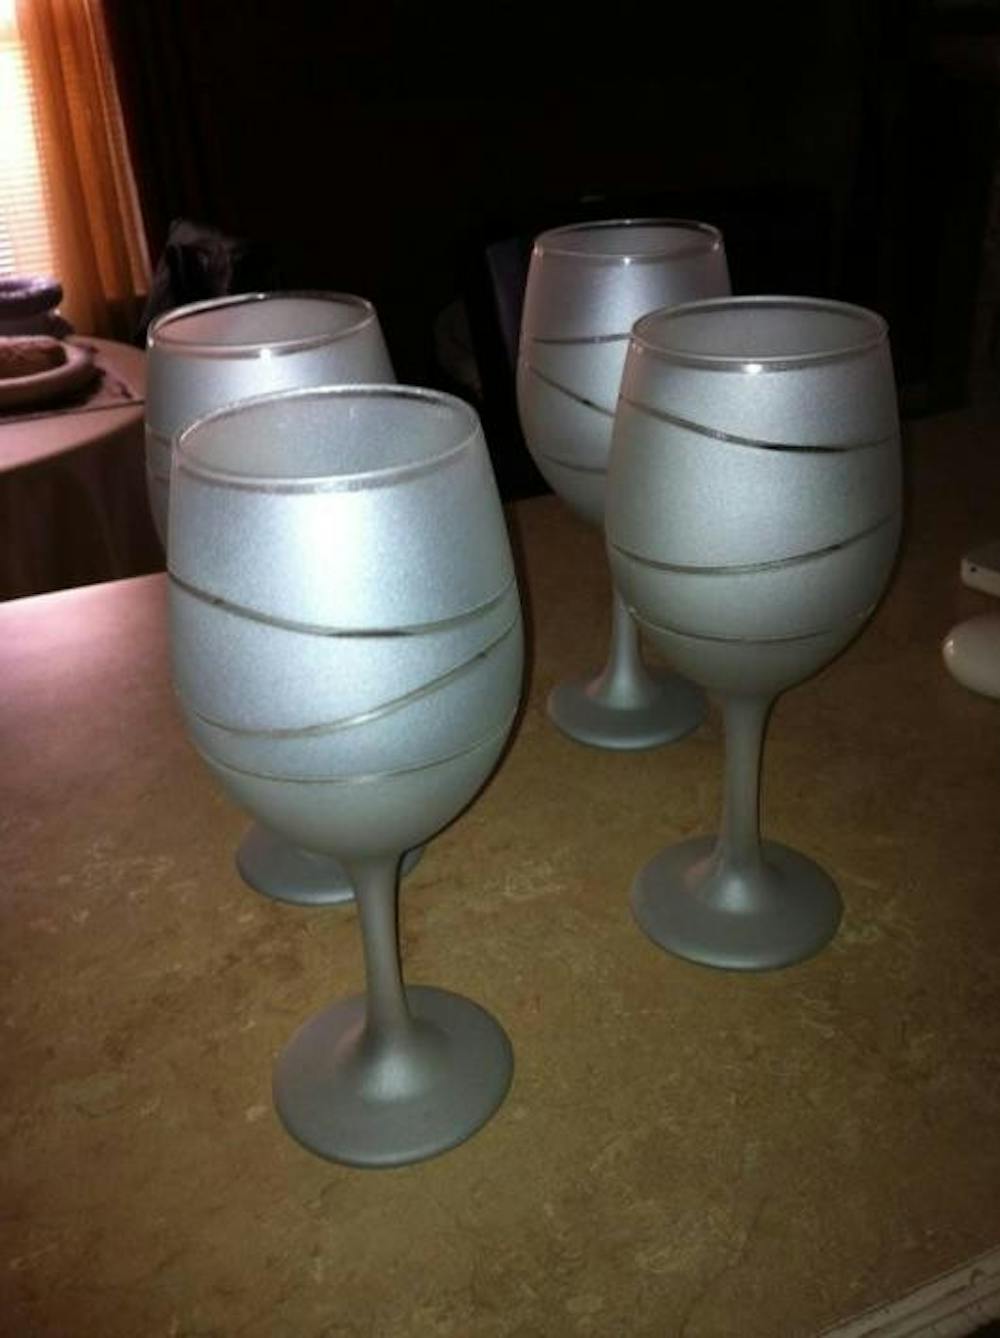 A beautifully frosted wine glass. Photo from Home Sweets Home.